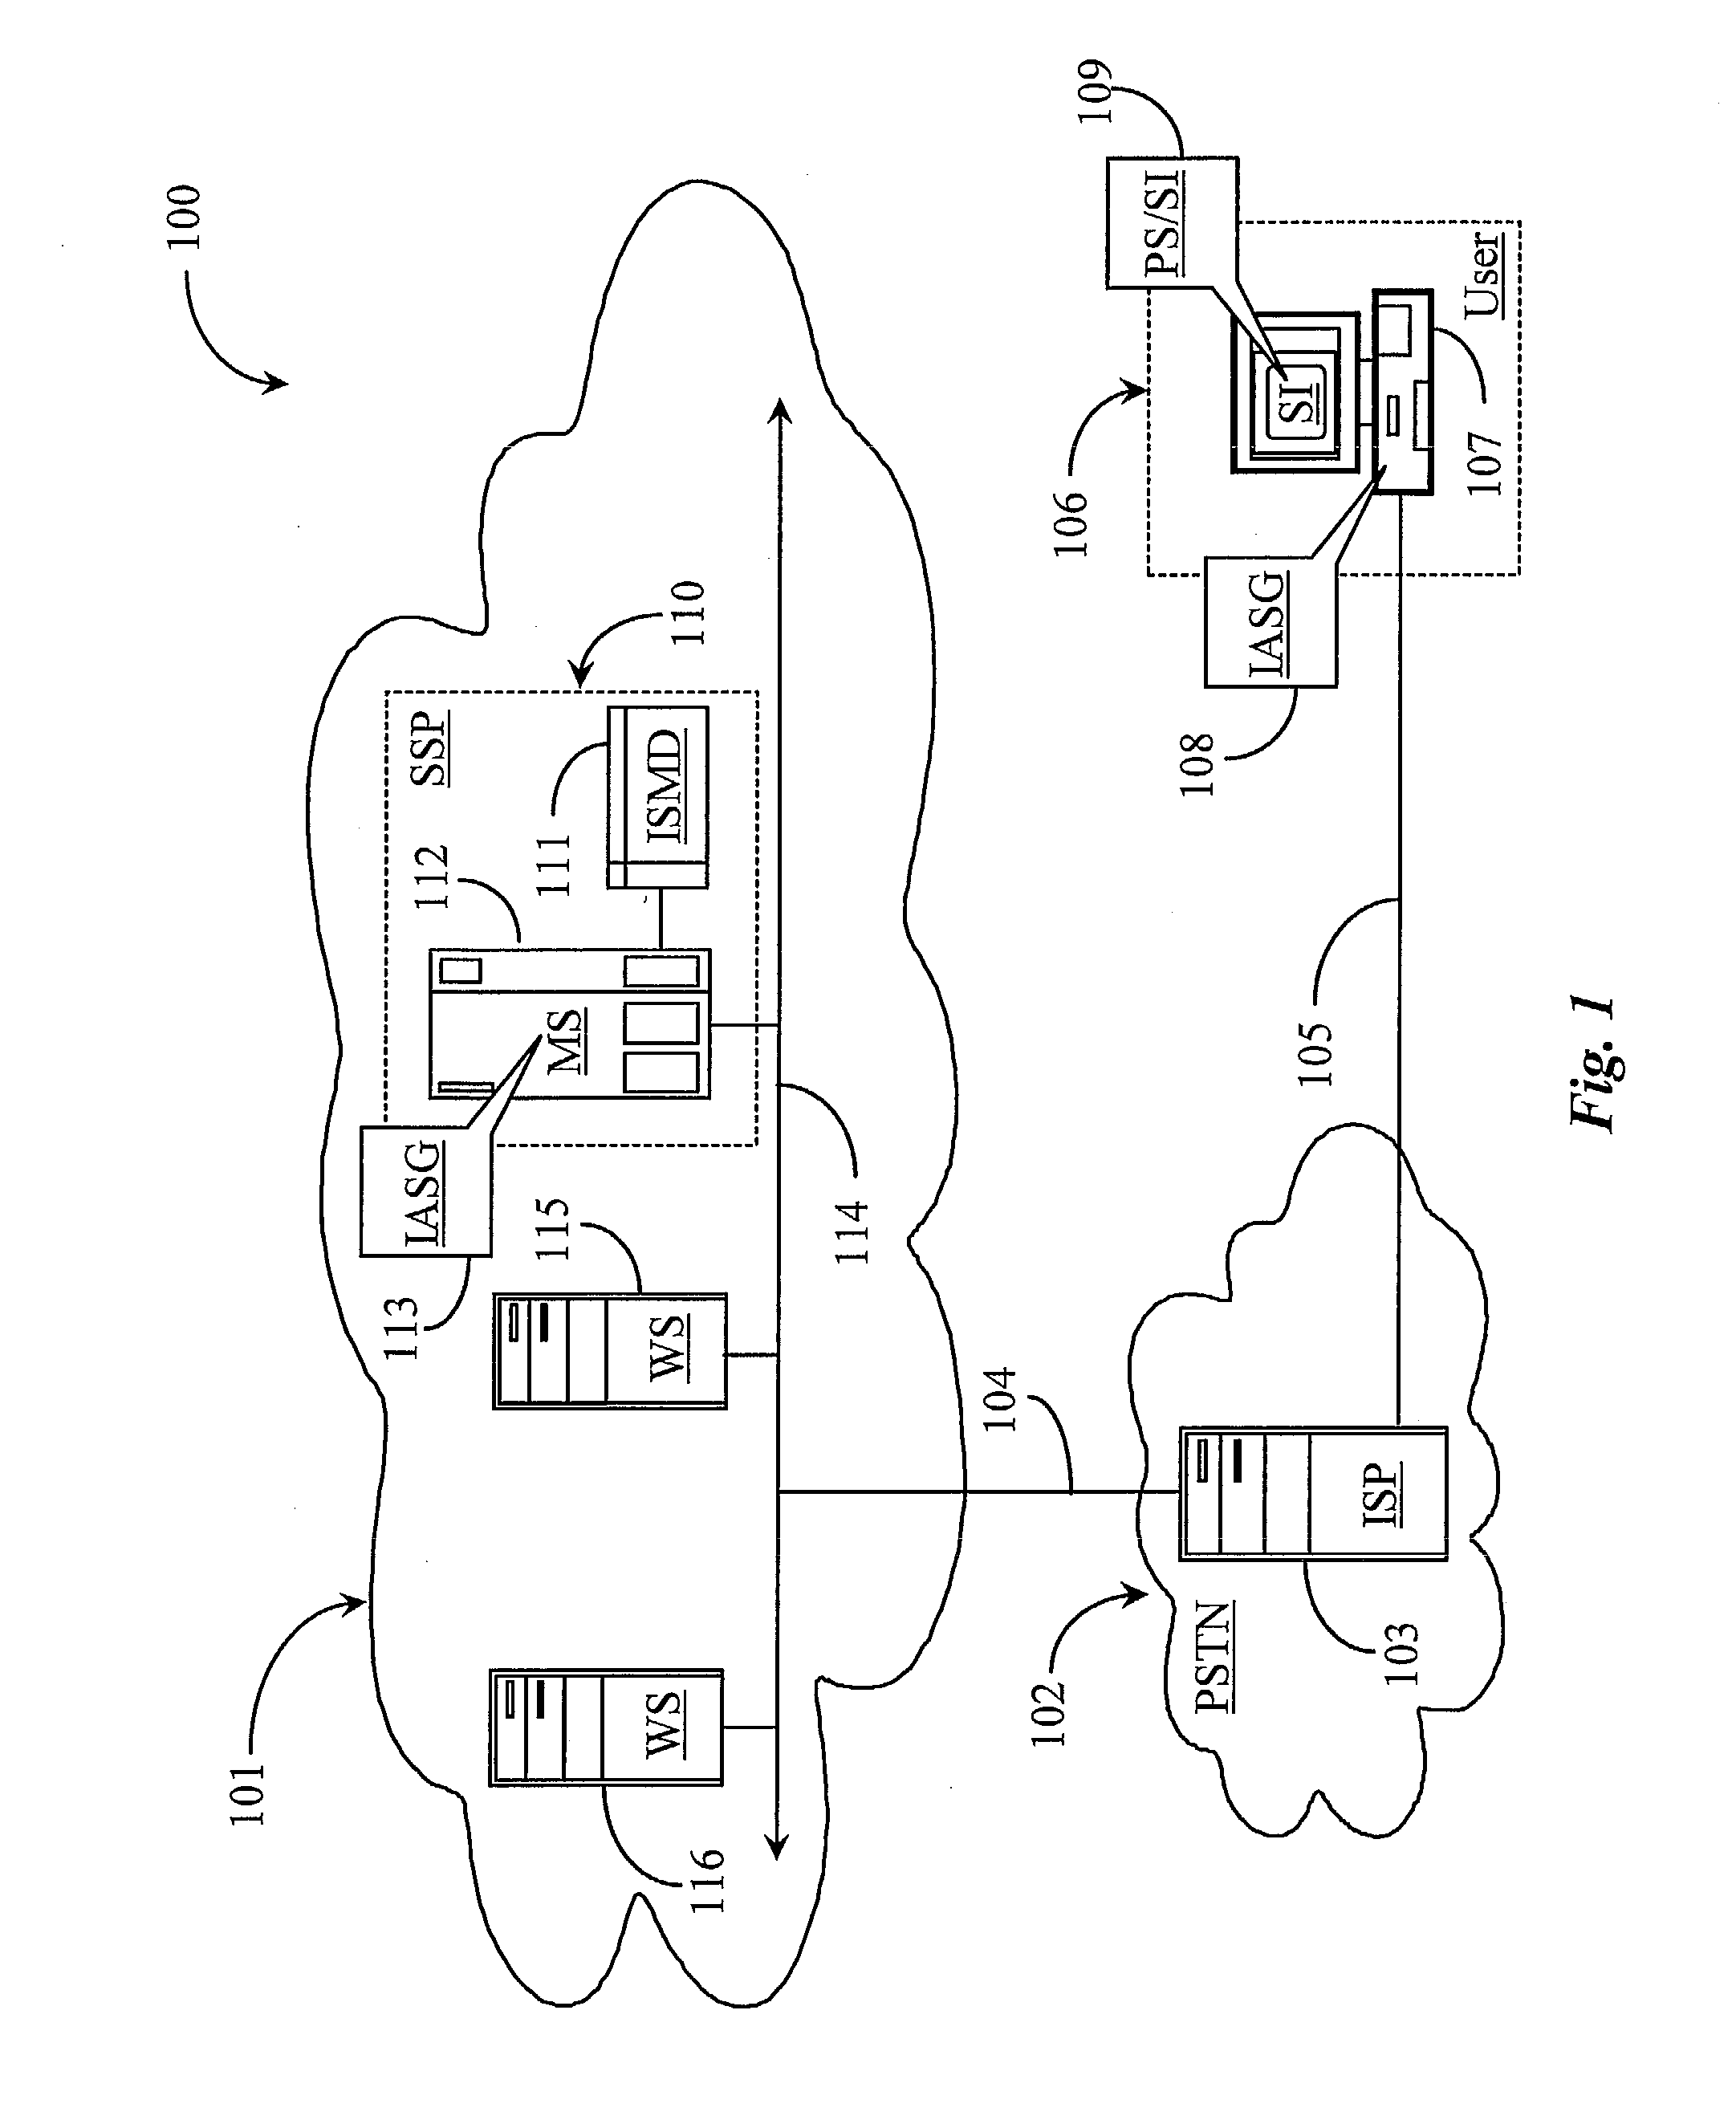 Method and Apparatus for Searching Images through a Search Engine Interface Using Image Data and Constraints as Input